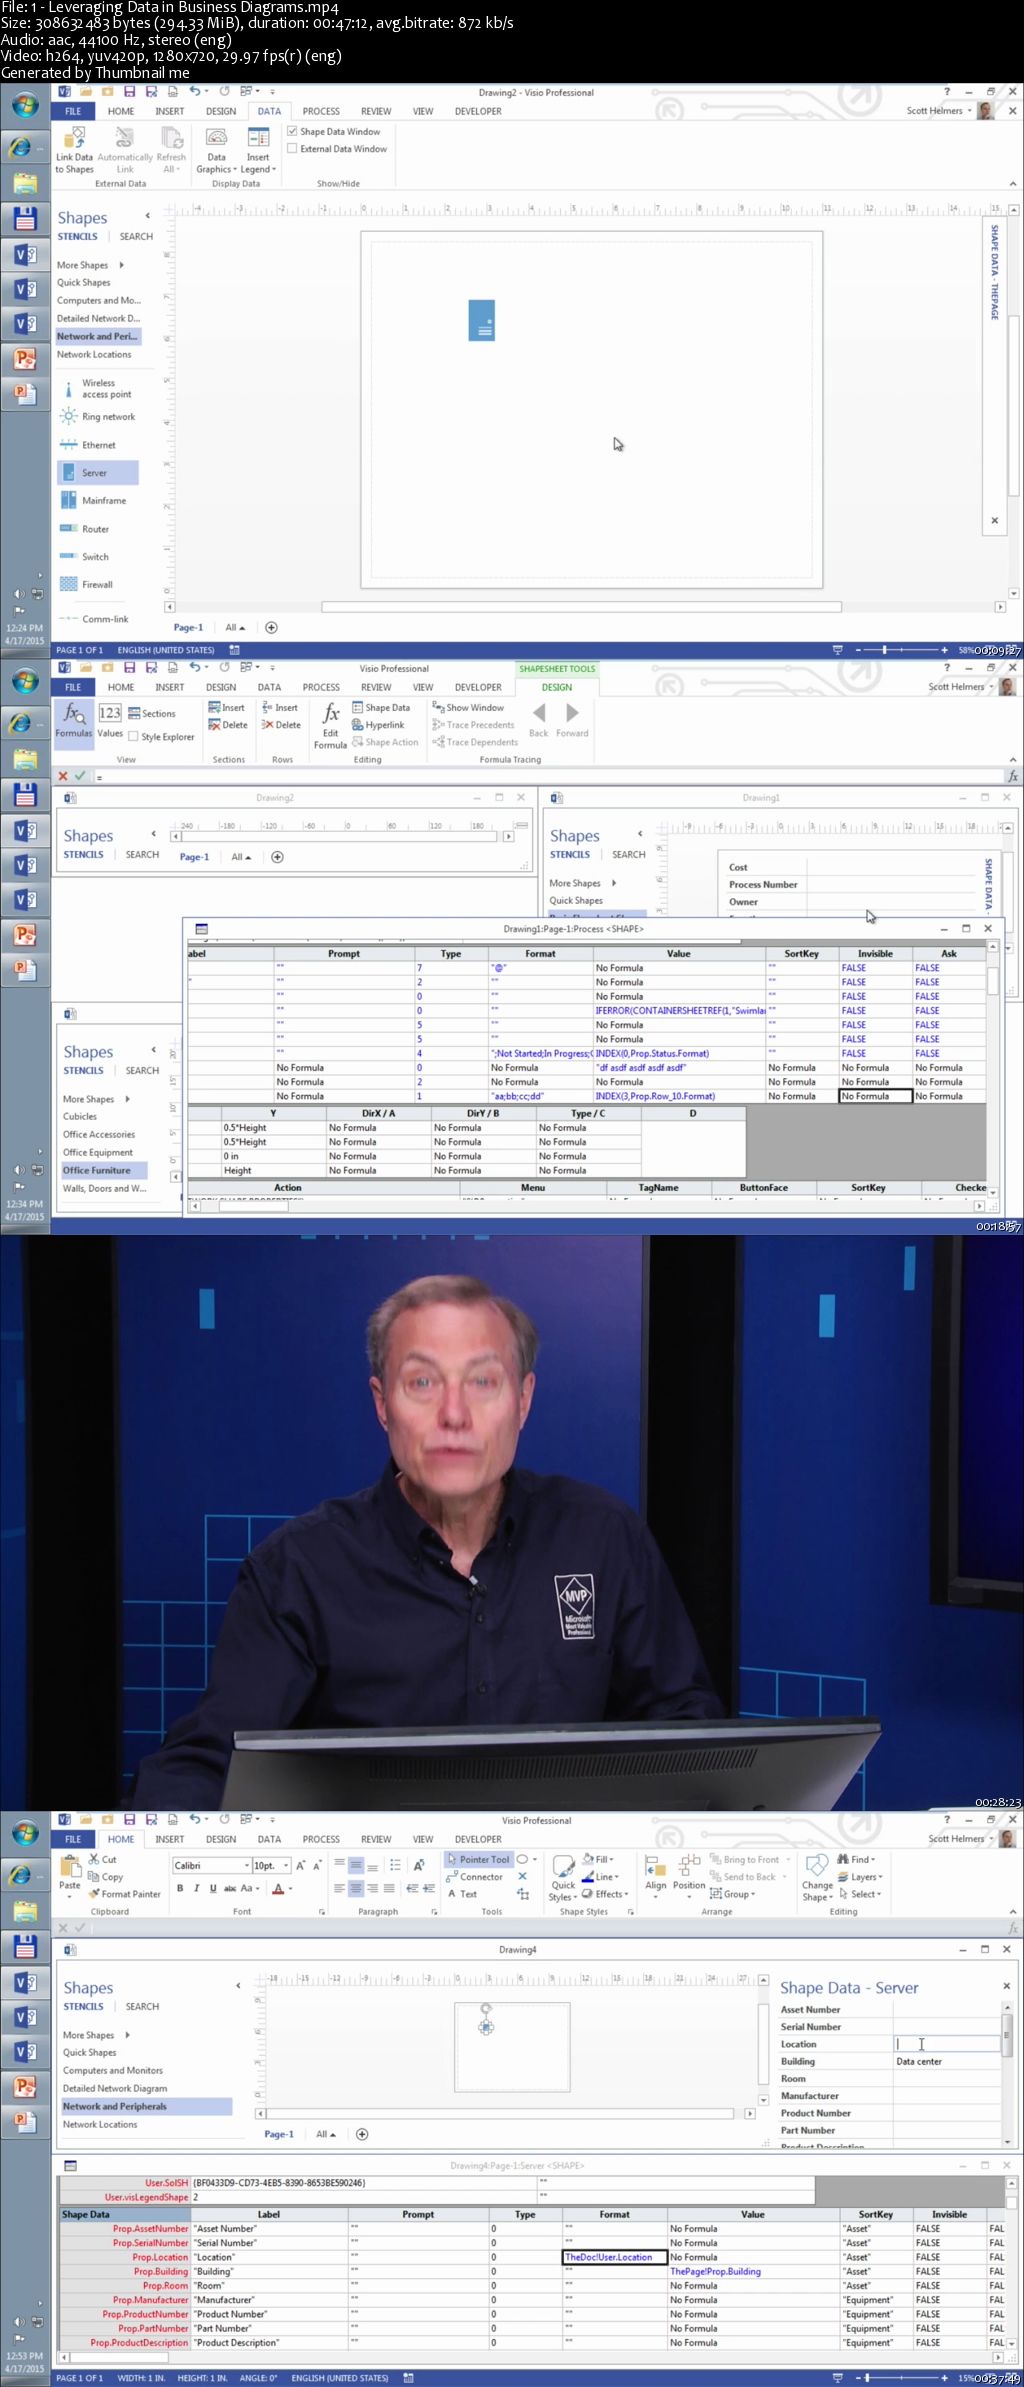 Becoming a Visio 2013 Power User: Part 2